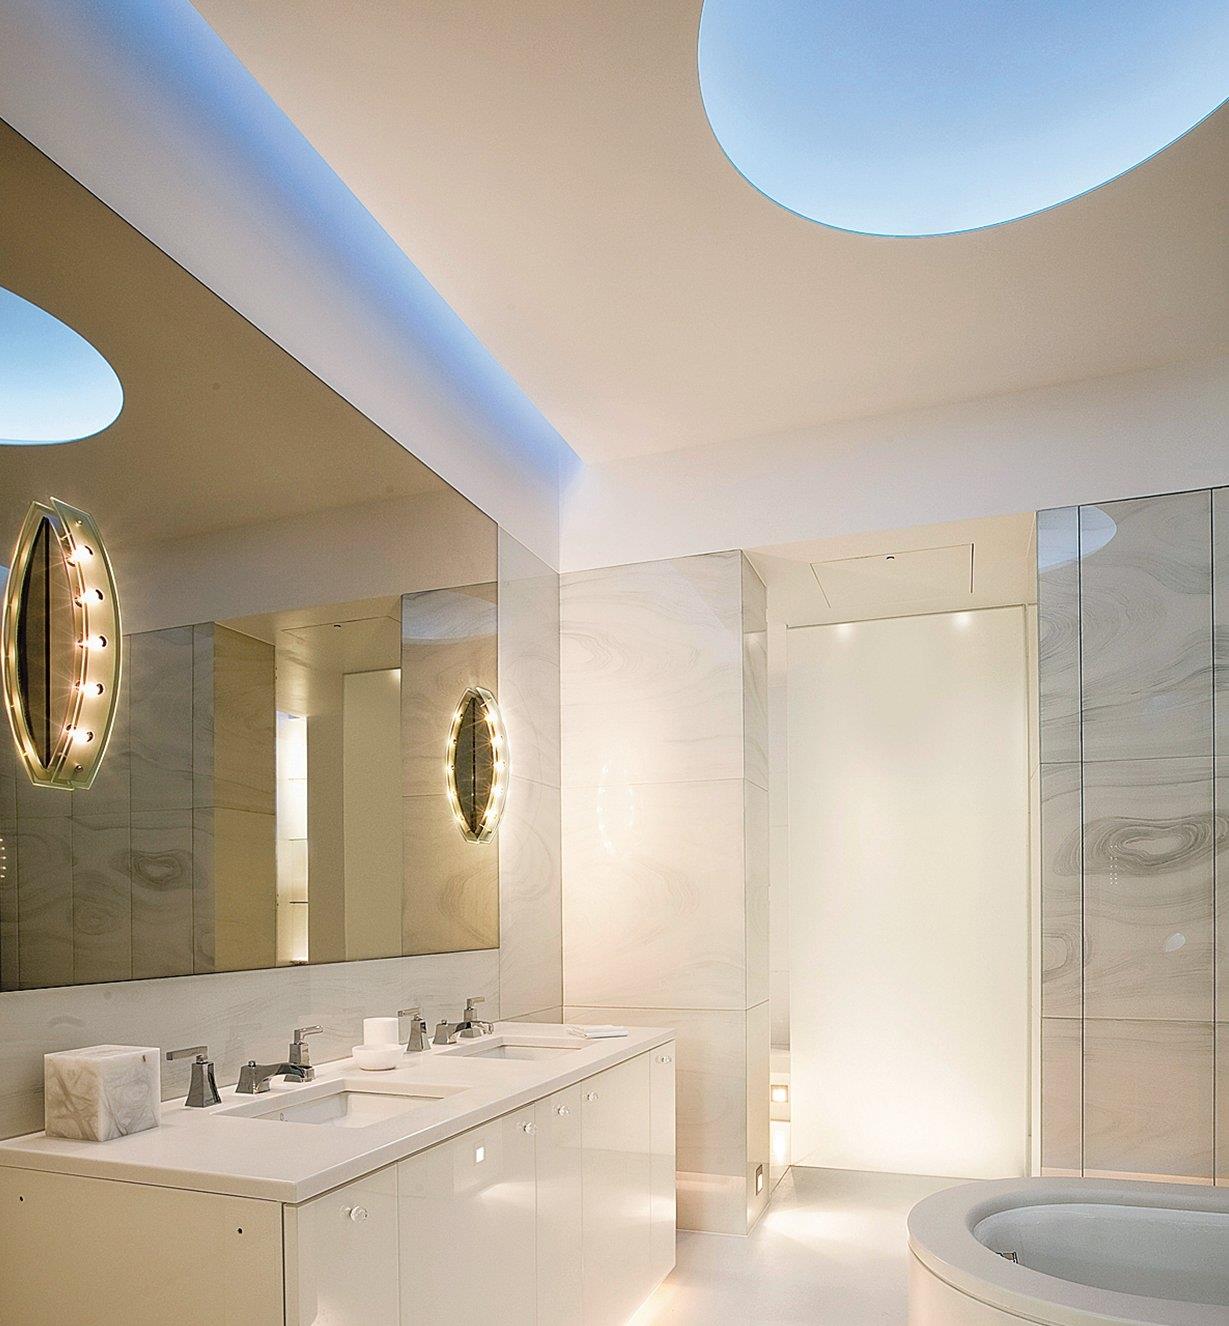 LED lights installed in a bathroom